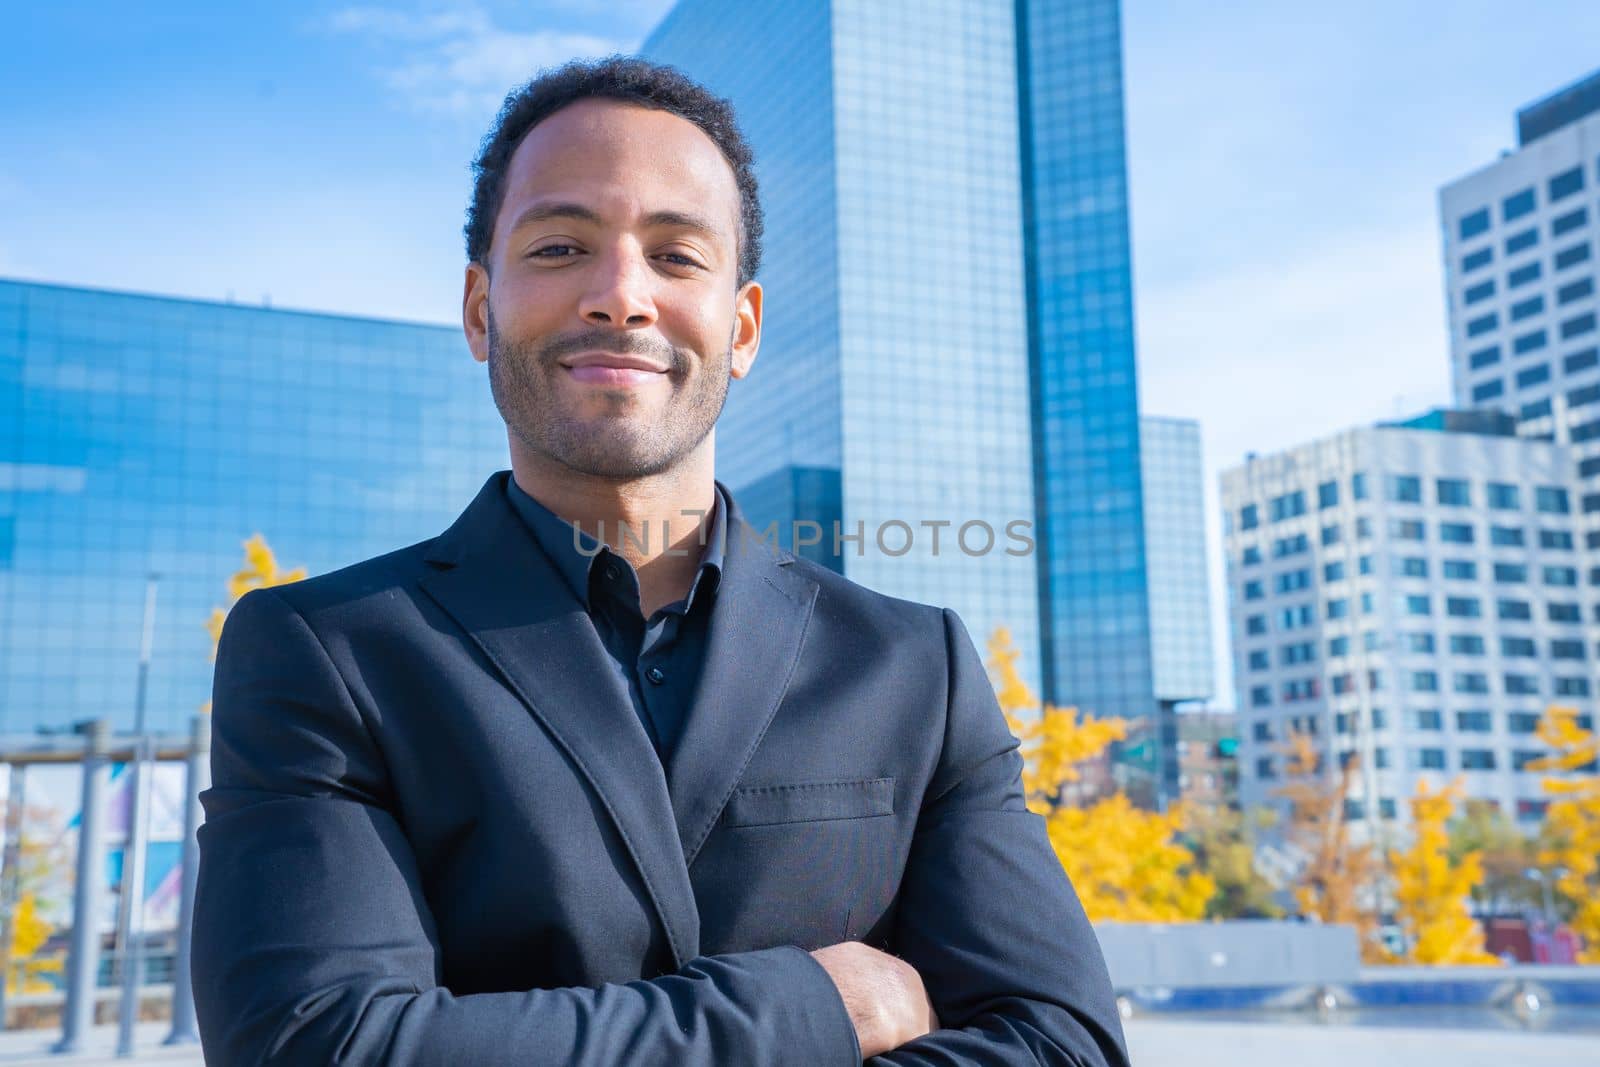 Portrait of successful smiling African American businessman in suit smiling looking at camera with financial buildings in background. Confident CEO black male happy. Business concept. High quality photo